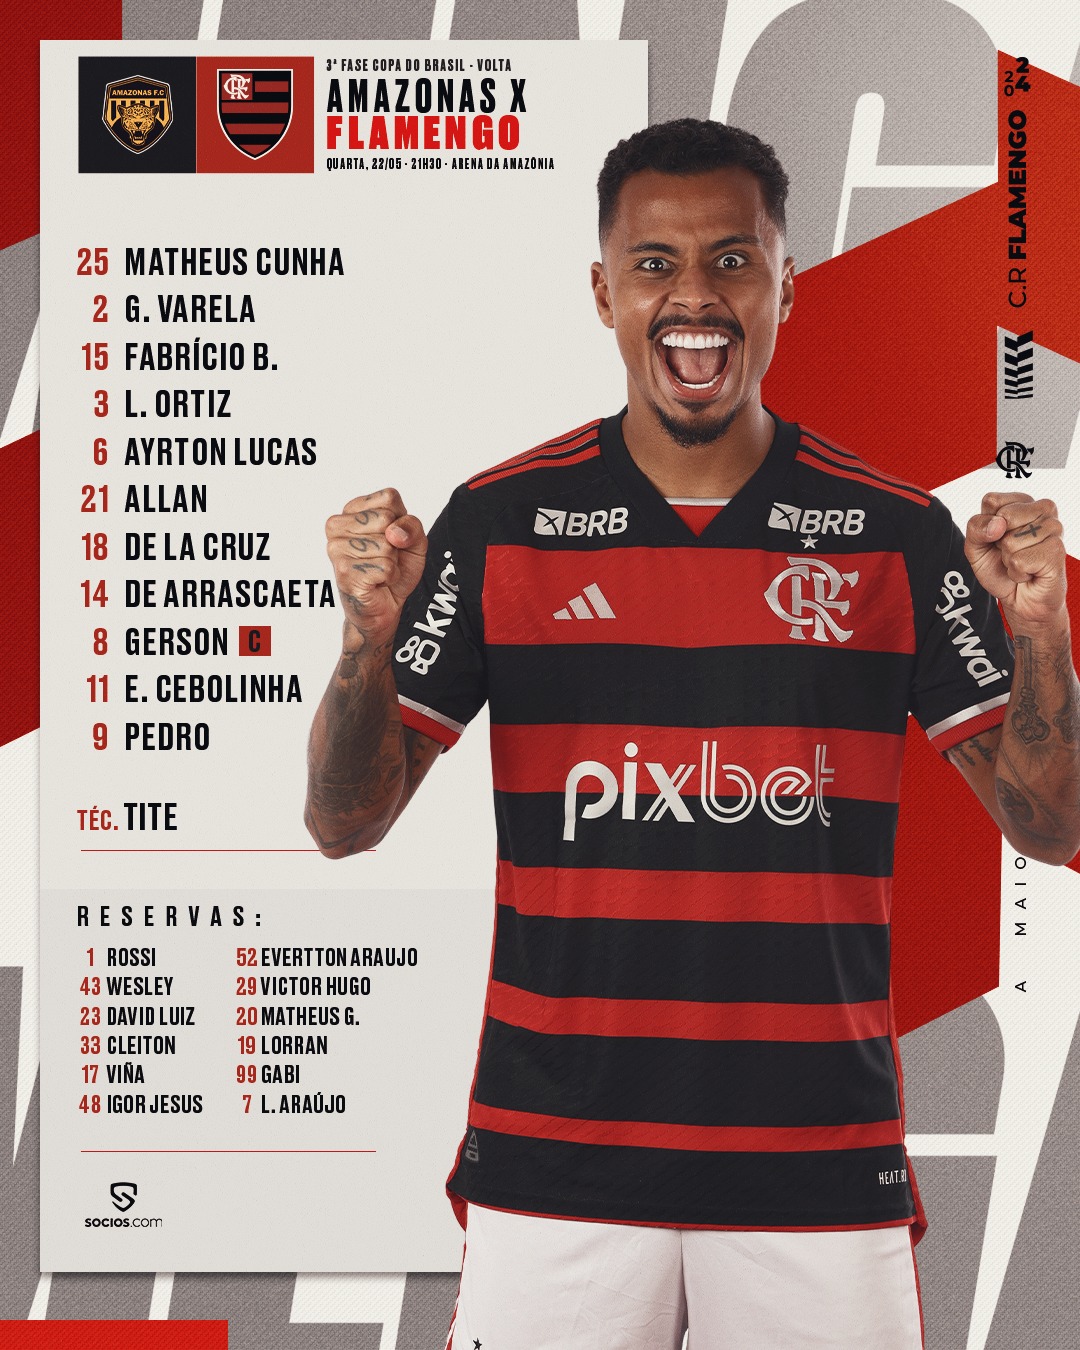 Flamengo announces its lineup to face Amazonas